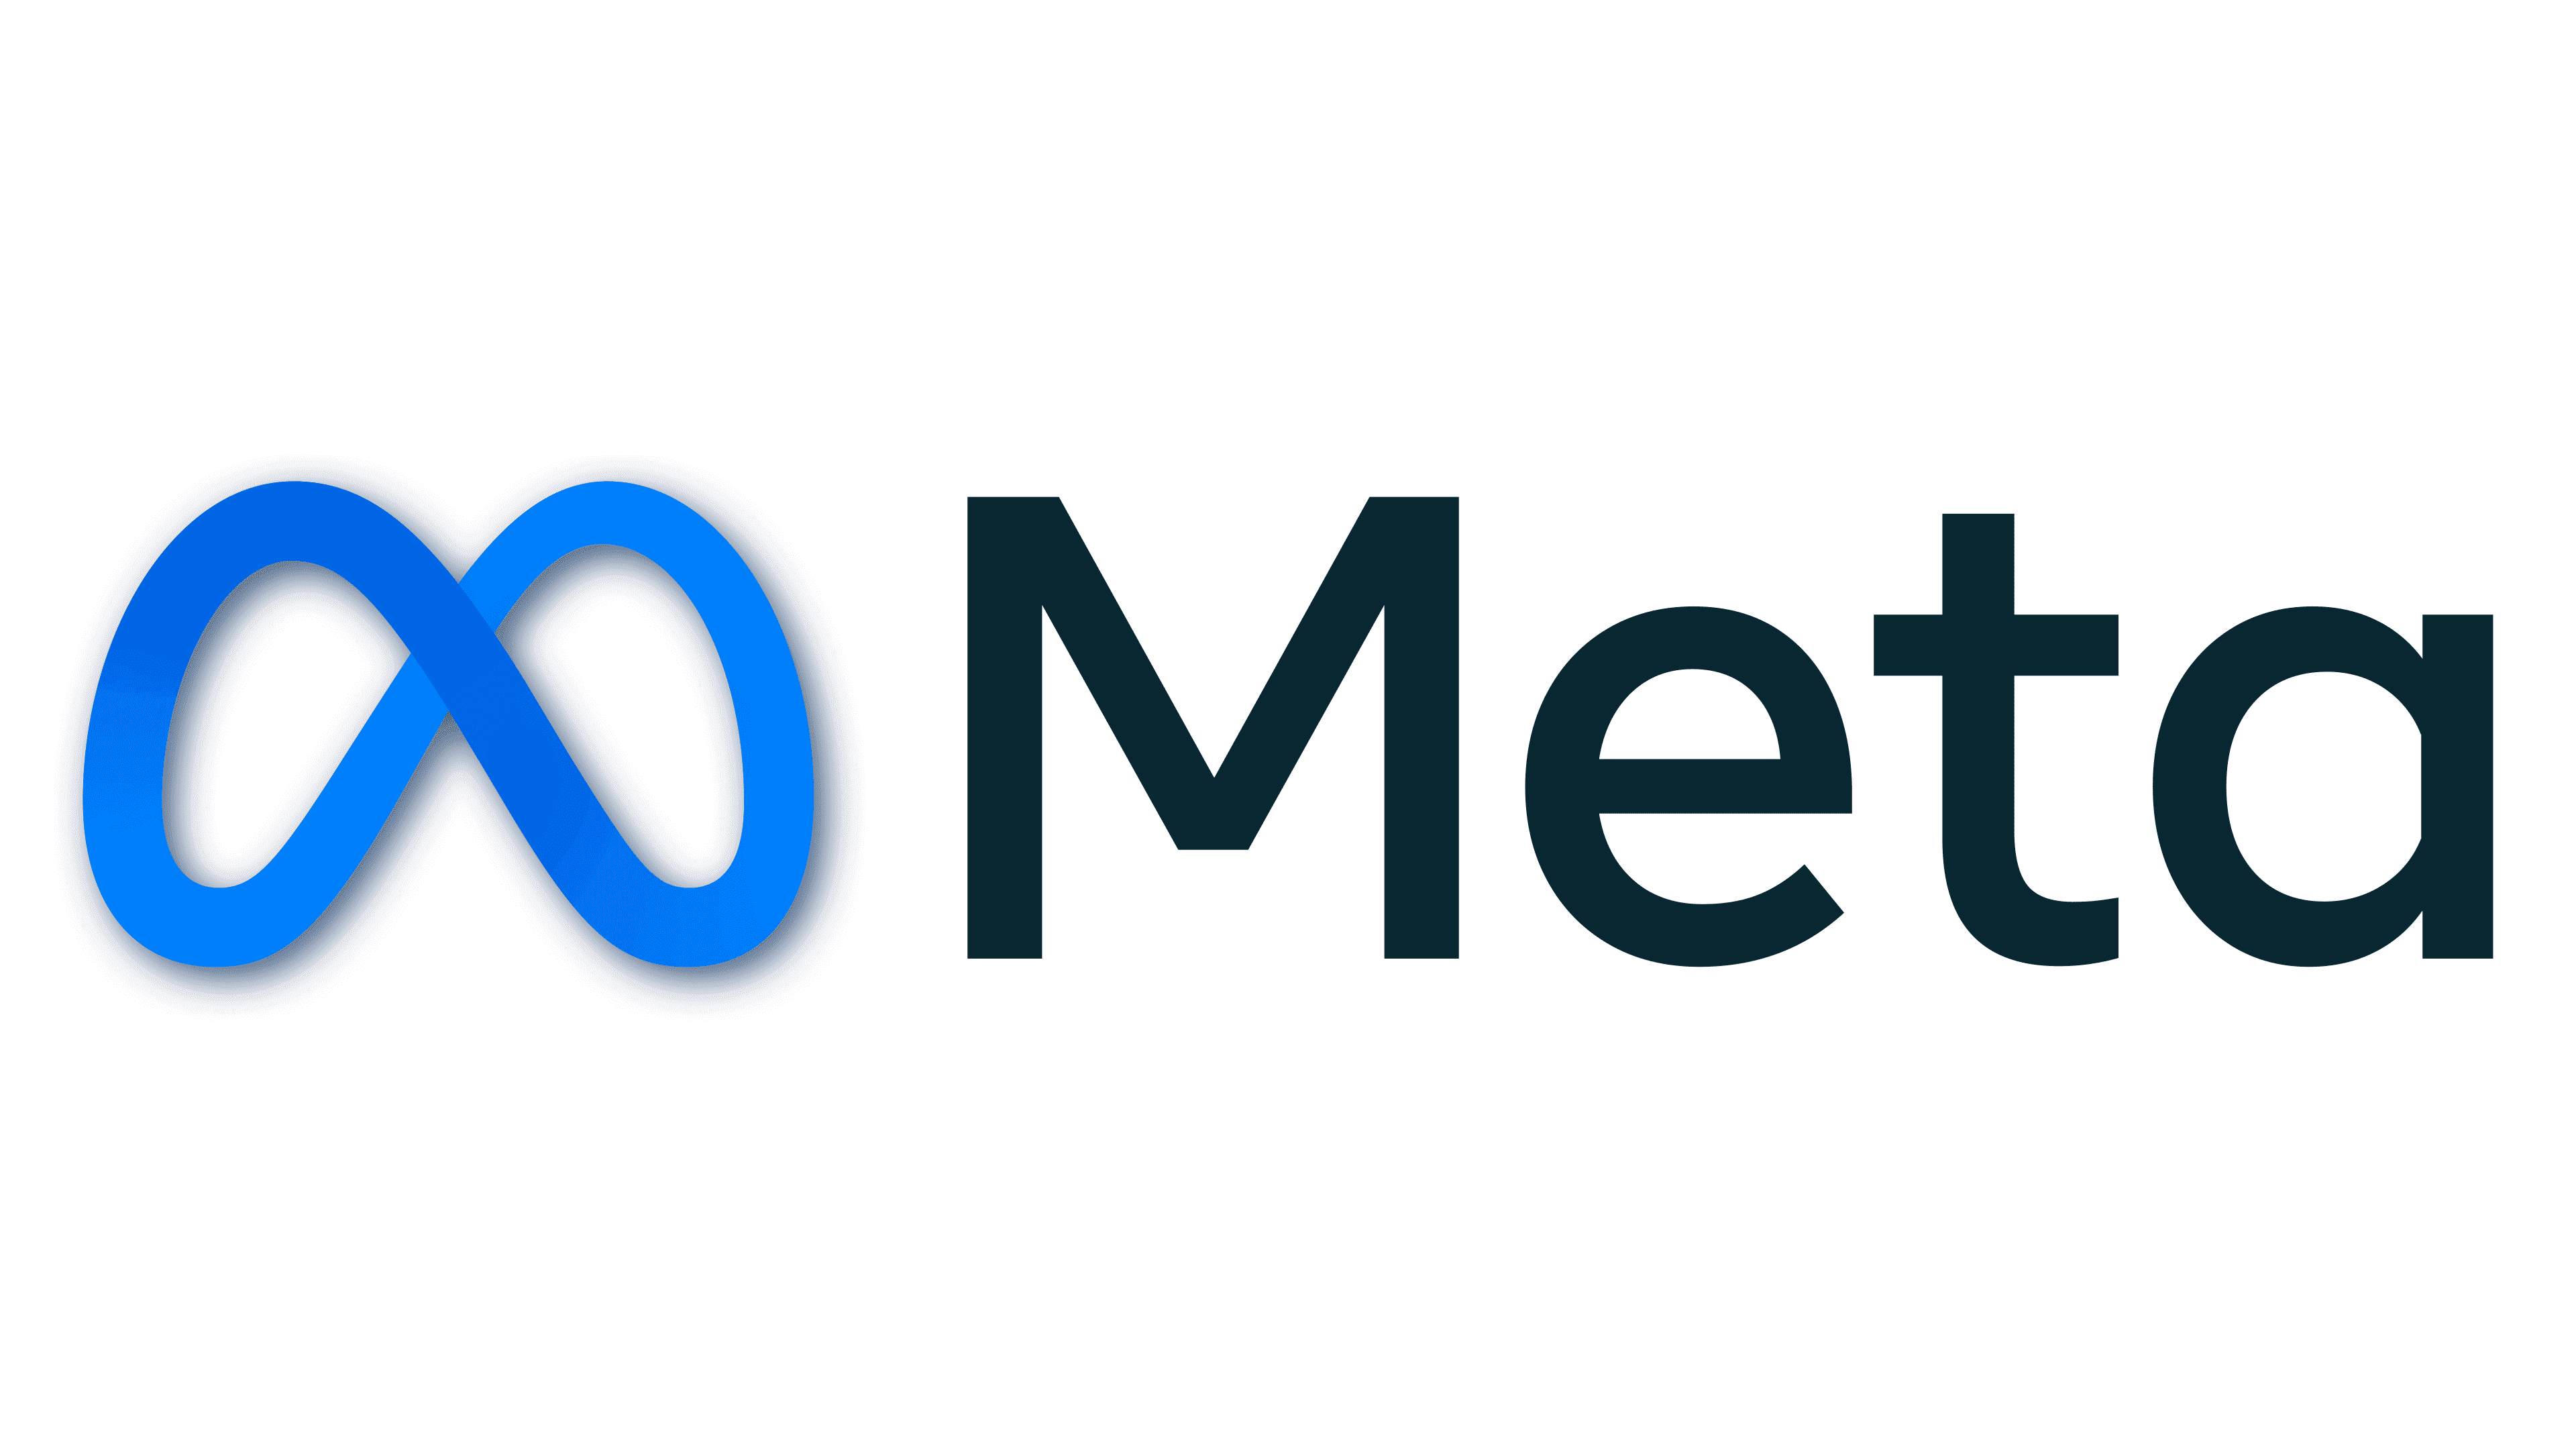 As Wall Street rallies due to layoffs, Meta shares increase by 7%.